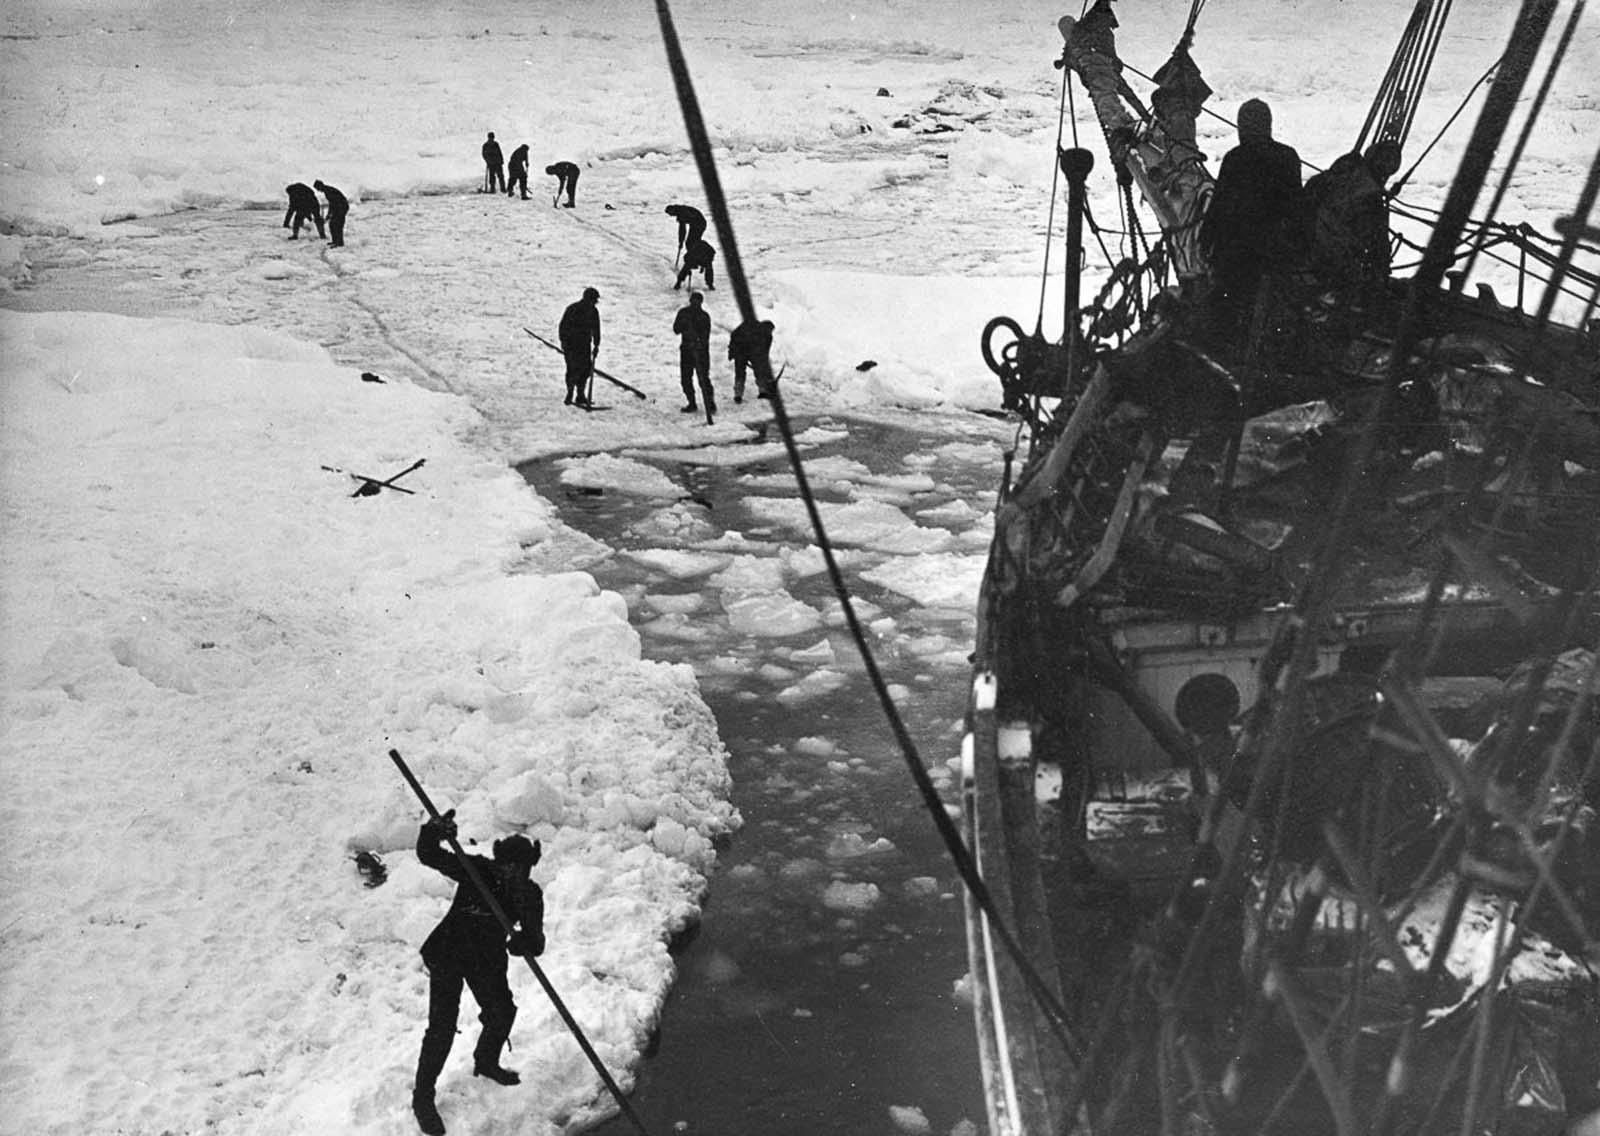 Stunning Historical Photos of Shackleton's Expedition to Antarctica, 1914-1917